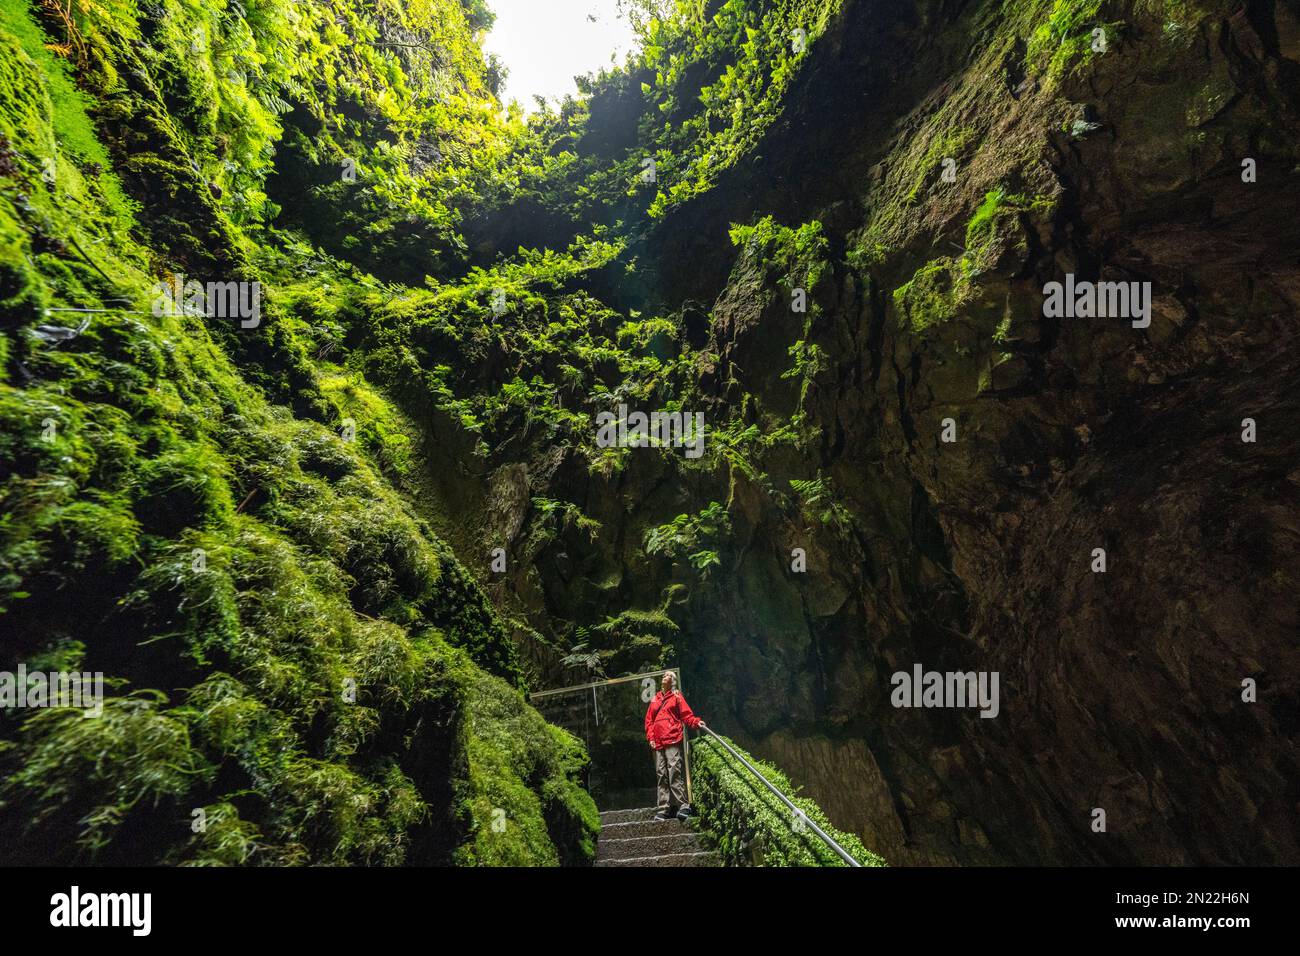 A tourist looks up inside the Algar do Carvão, a vertical lava tube dropping 300 feet from the surface accessible by a narrow staircase to a clear water pool at the bottom in the central mountains, Terceira Island, Azores, Portugal. Stock Photo